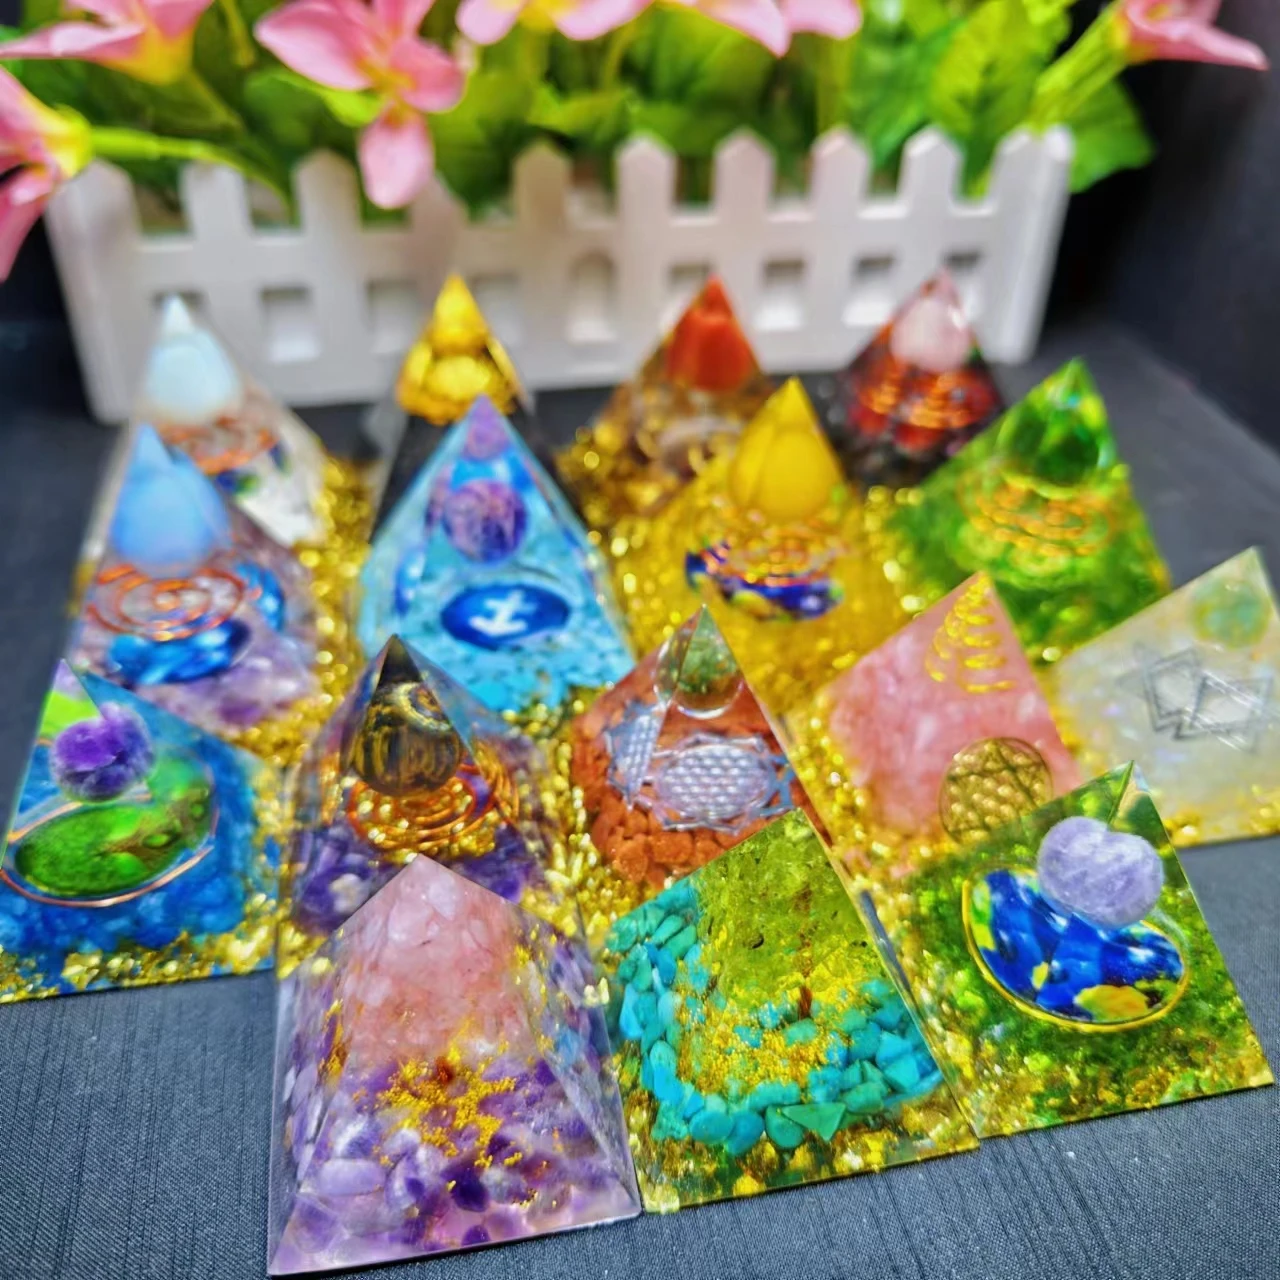 

Hot Sale Orgonite Pyramids Resin Energy Generator Healing Chips Stone Crafts Meditation Crystal Pyramid For Fengshui